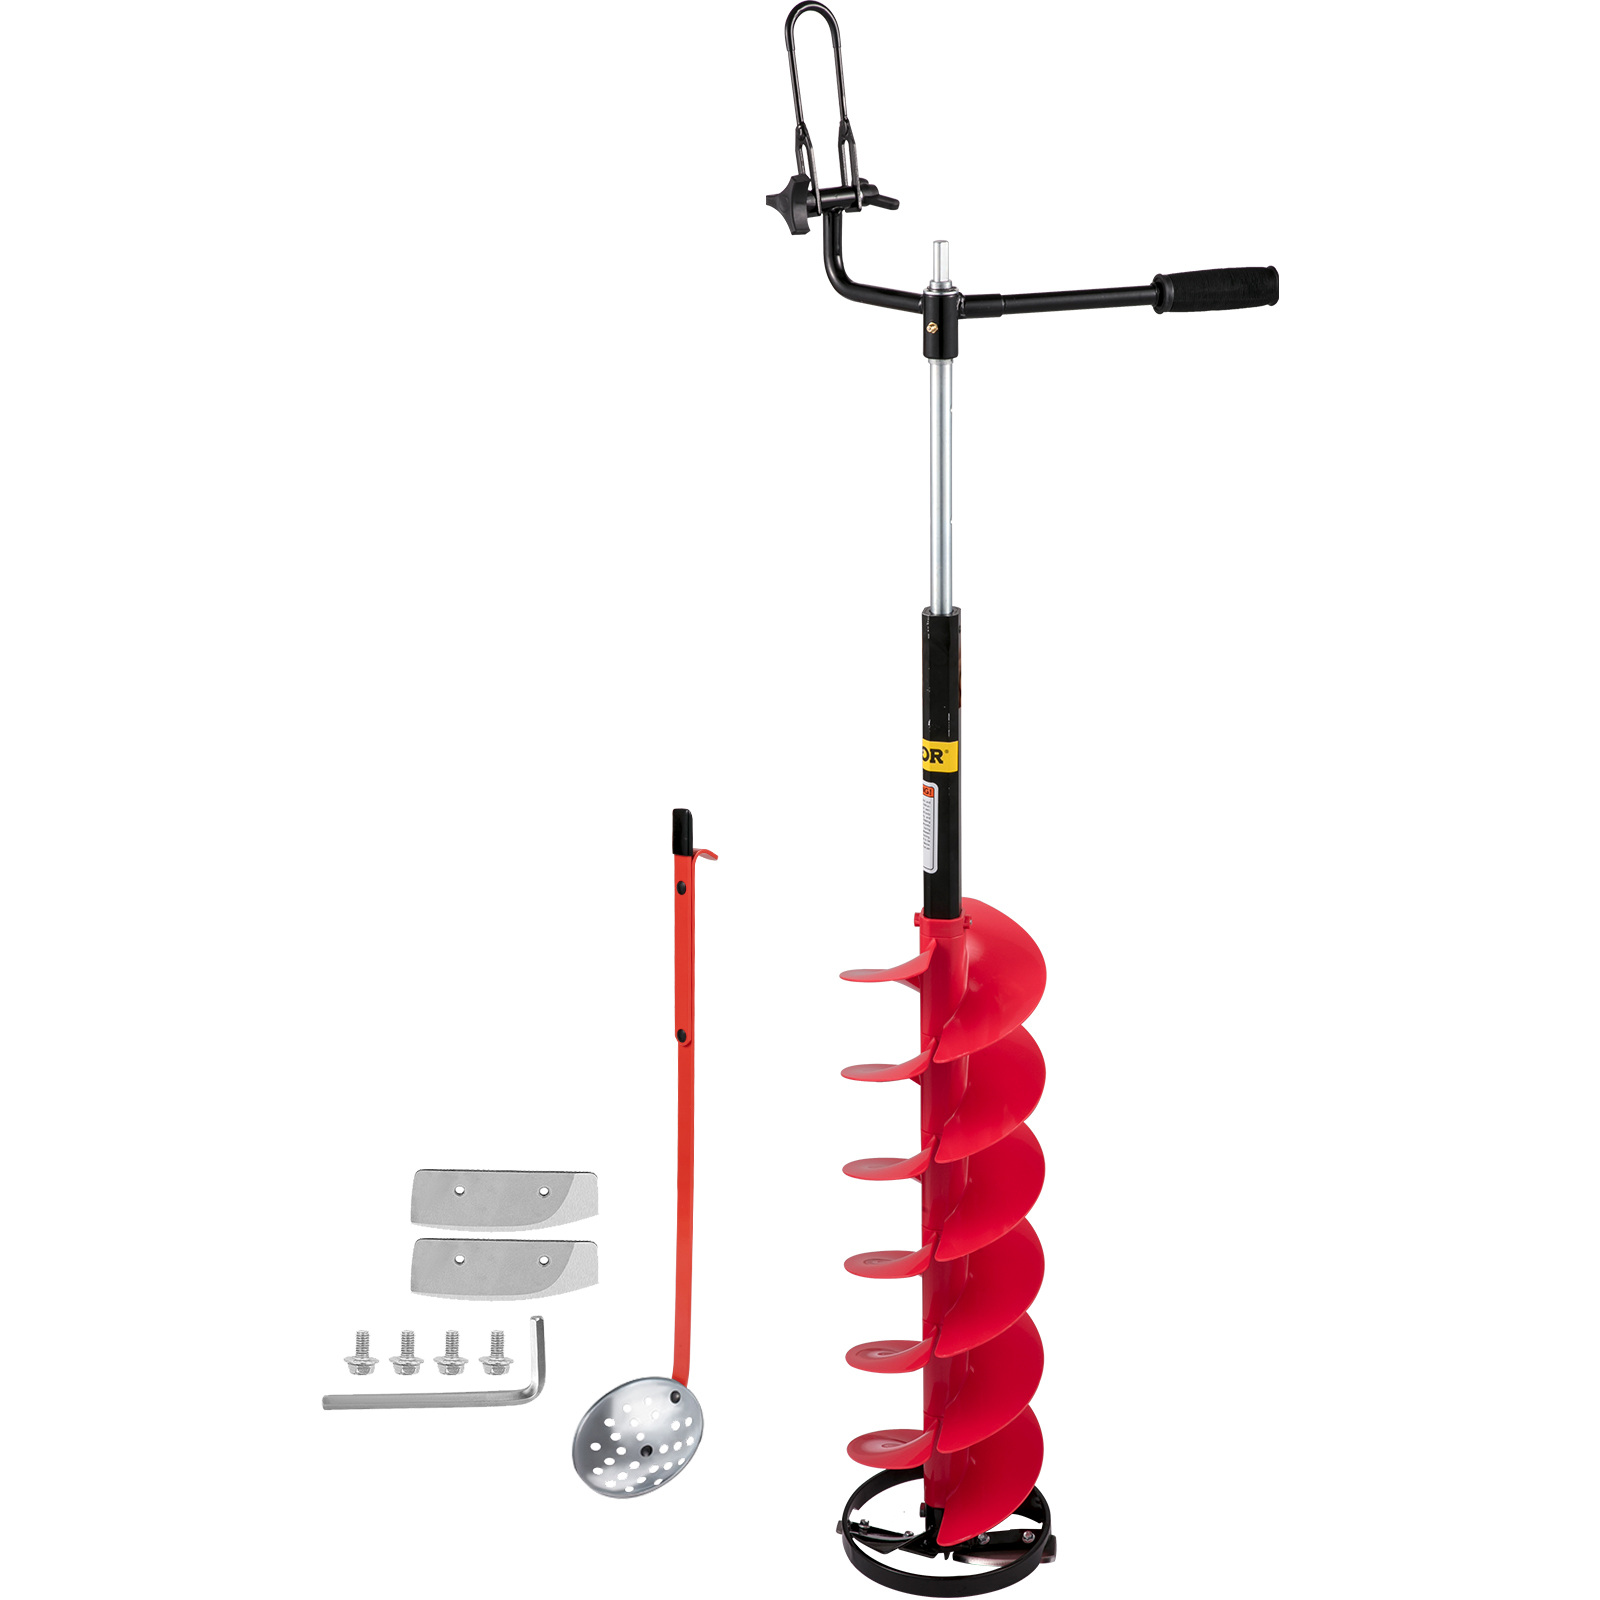 VEVOR Ice Drill Auger, 8 Diameter 41 Length Nylon Ice Auger, Auger Drill  w/ 14 Adjustable Extension Rod, Rubber Handle, Drill Adapter, Replaceable  Auger Blade for Ice Fishing Ice Burrowing Red